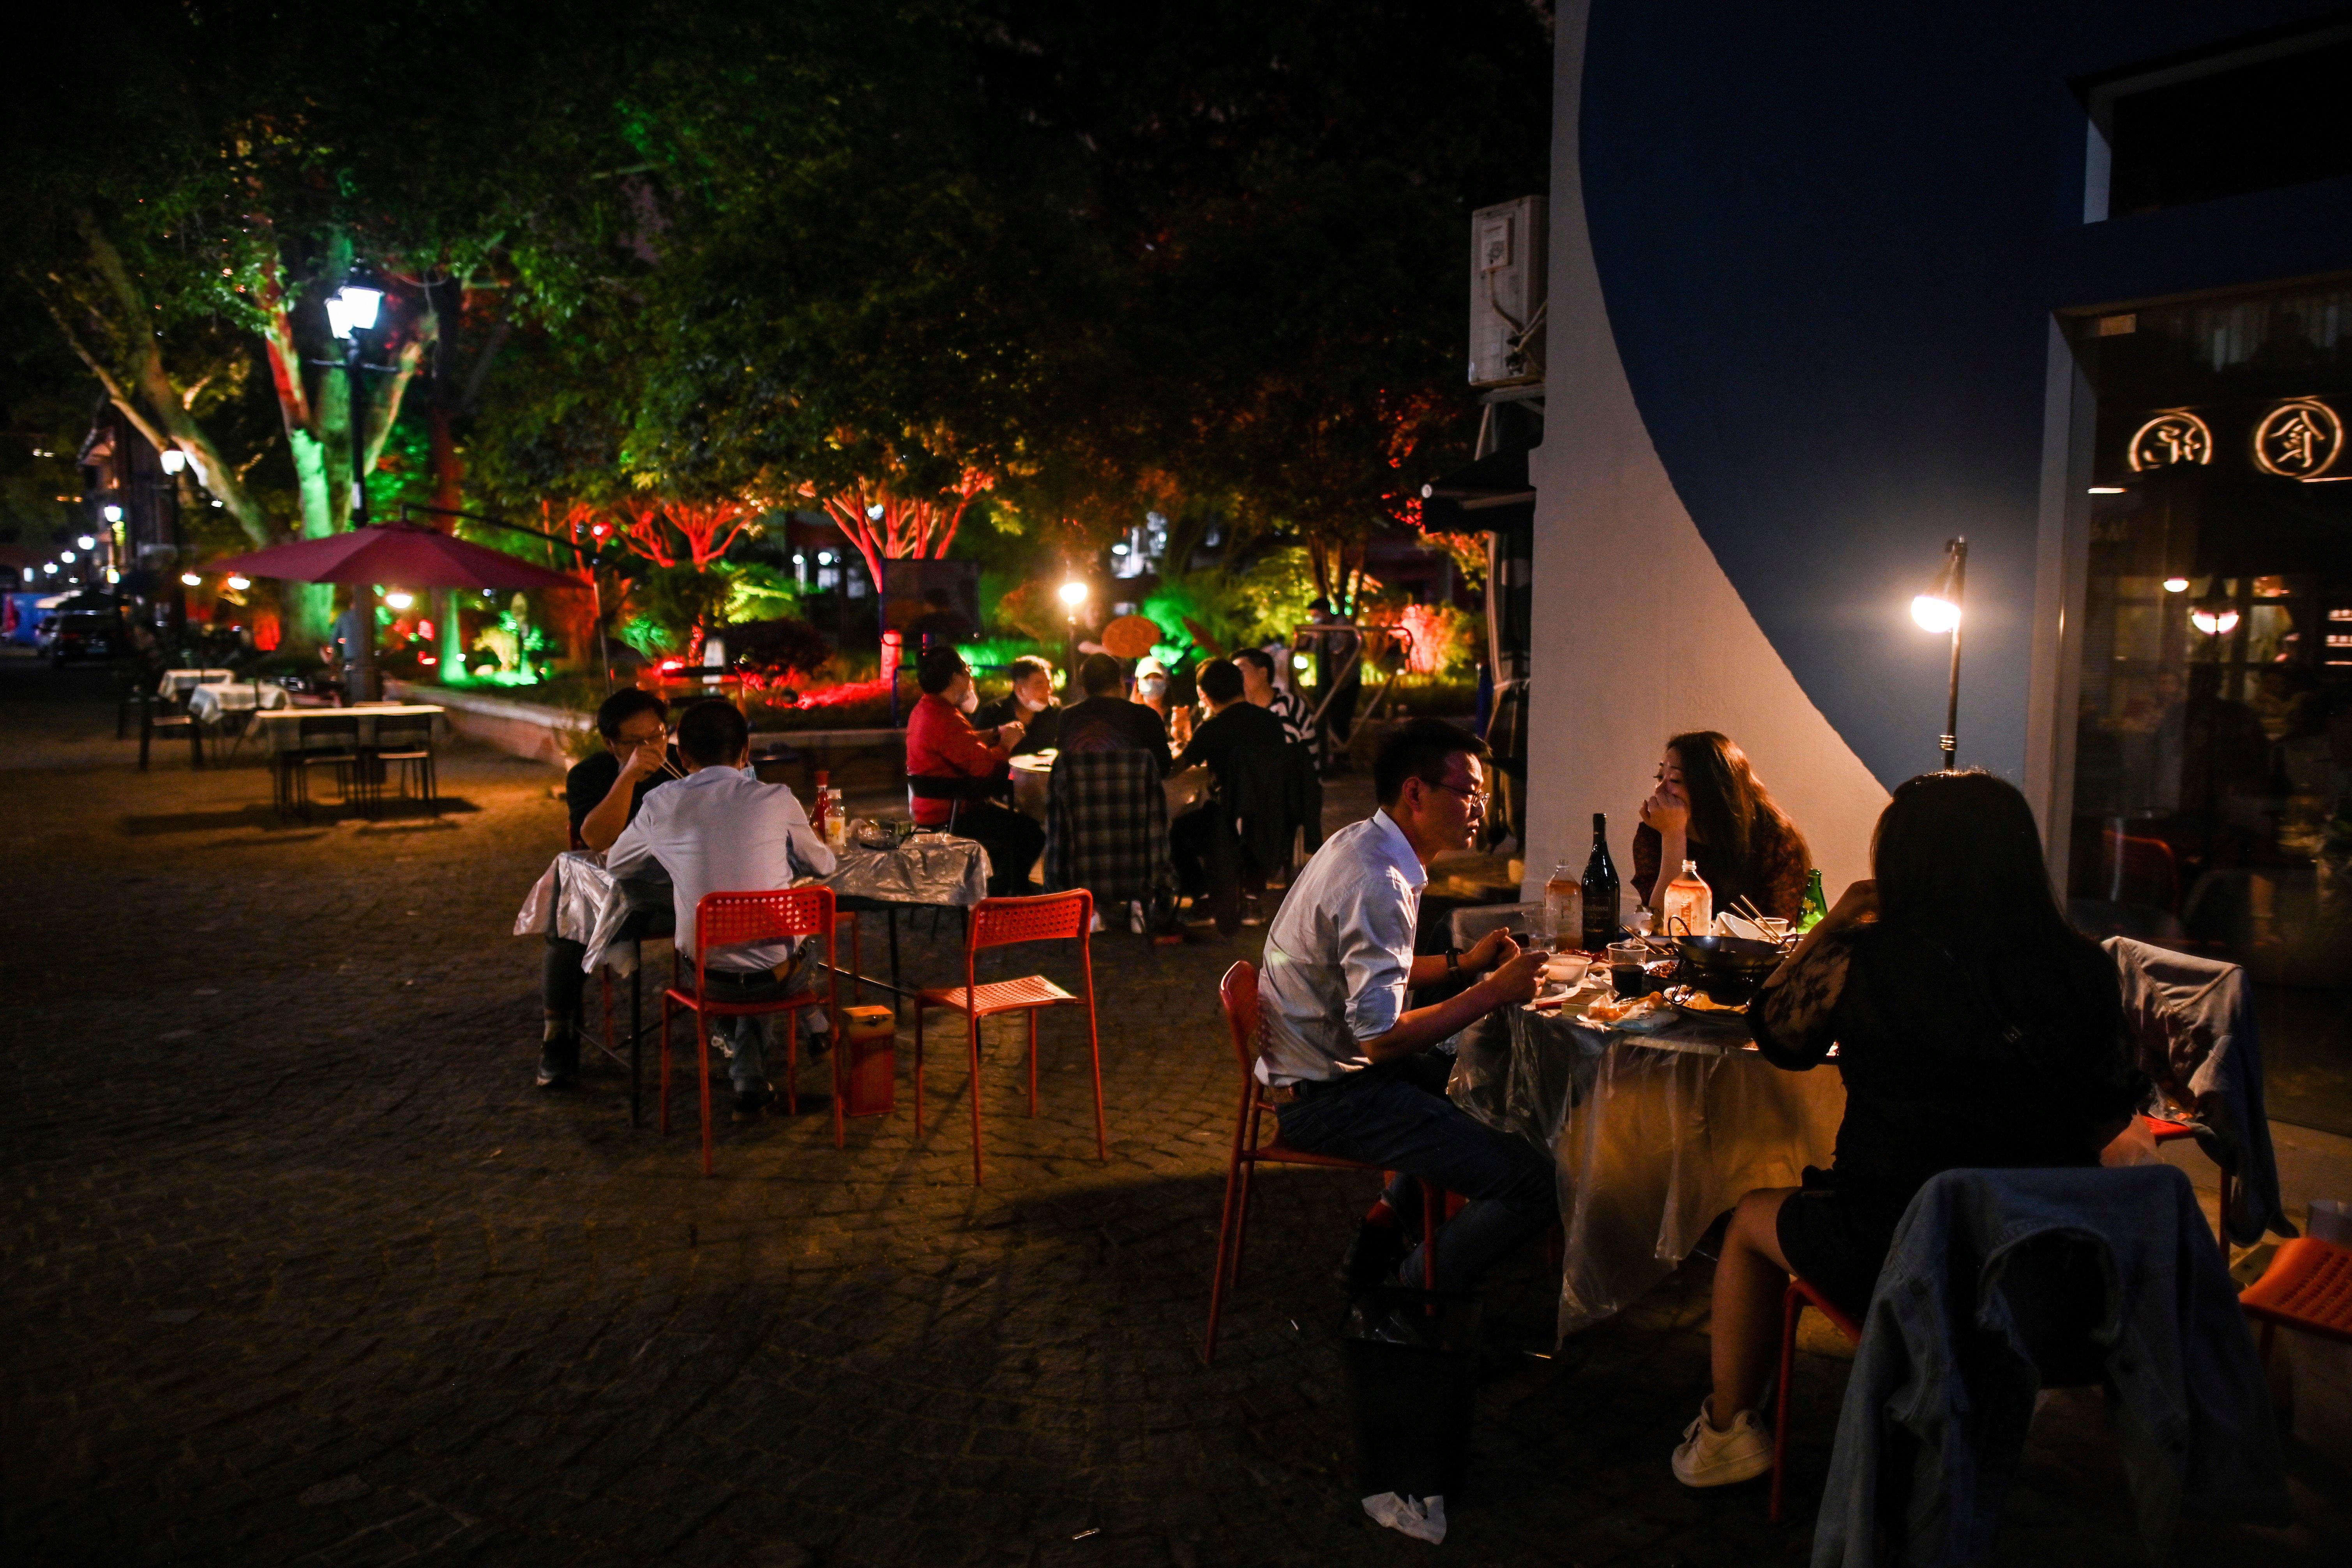 People eat outdoor next to a restaurant in Wuhan, in China's central Hubei province on April 16, 2020. - China has largely brought the coronavirus under control within its borders since the outbreak first emerged in the city of Wuhan late last year. (Photo by Hector RETAMAL / AFP) (Photo by HECTOR RETAMAL/AFP via Getty Images)